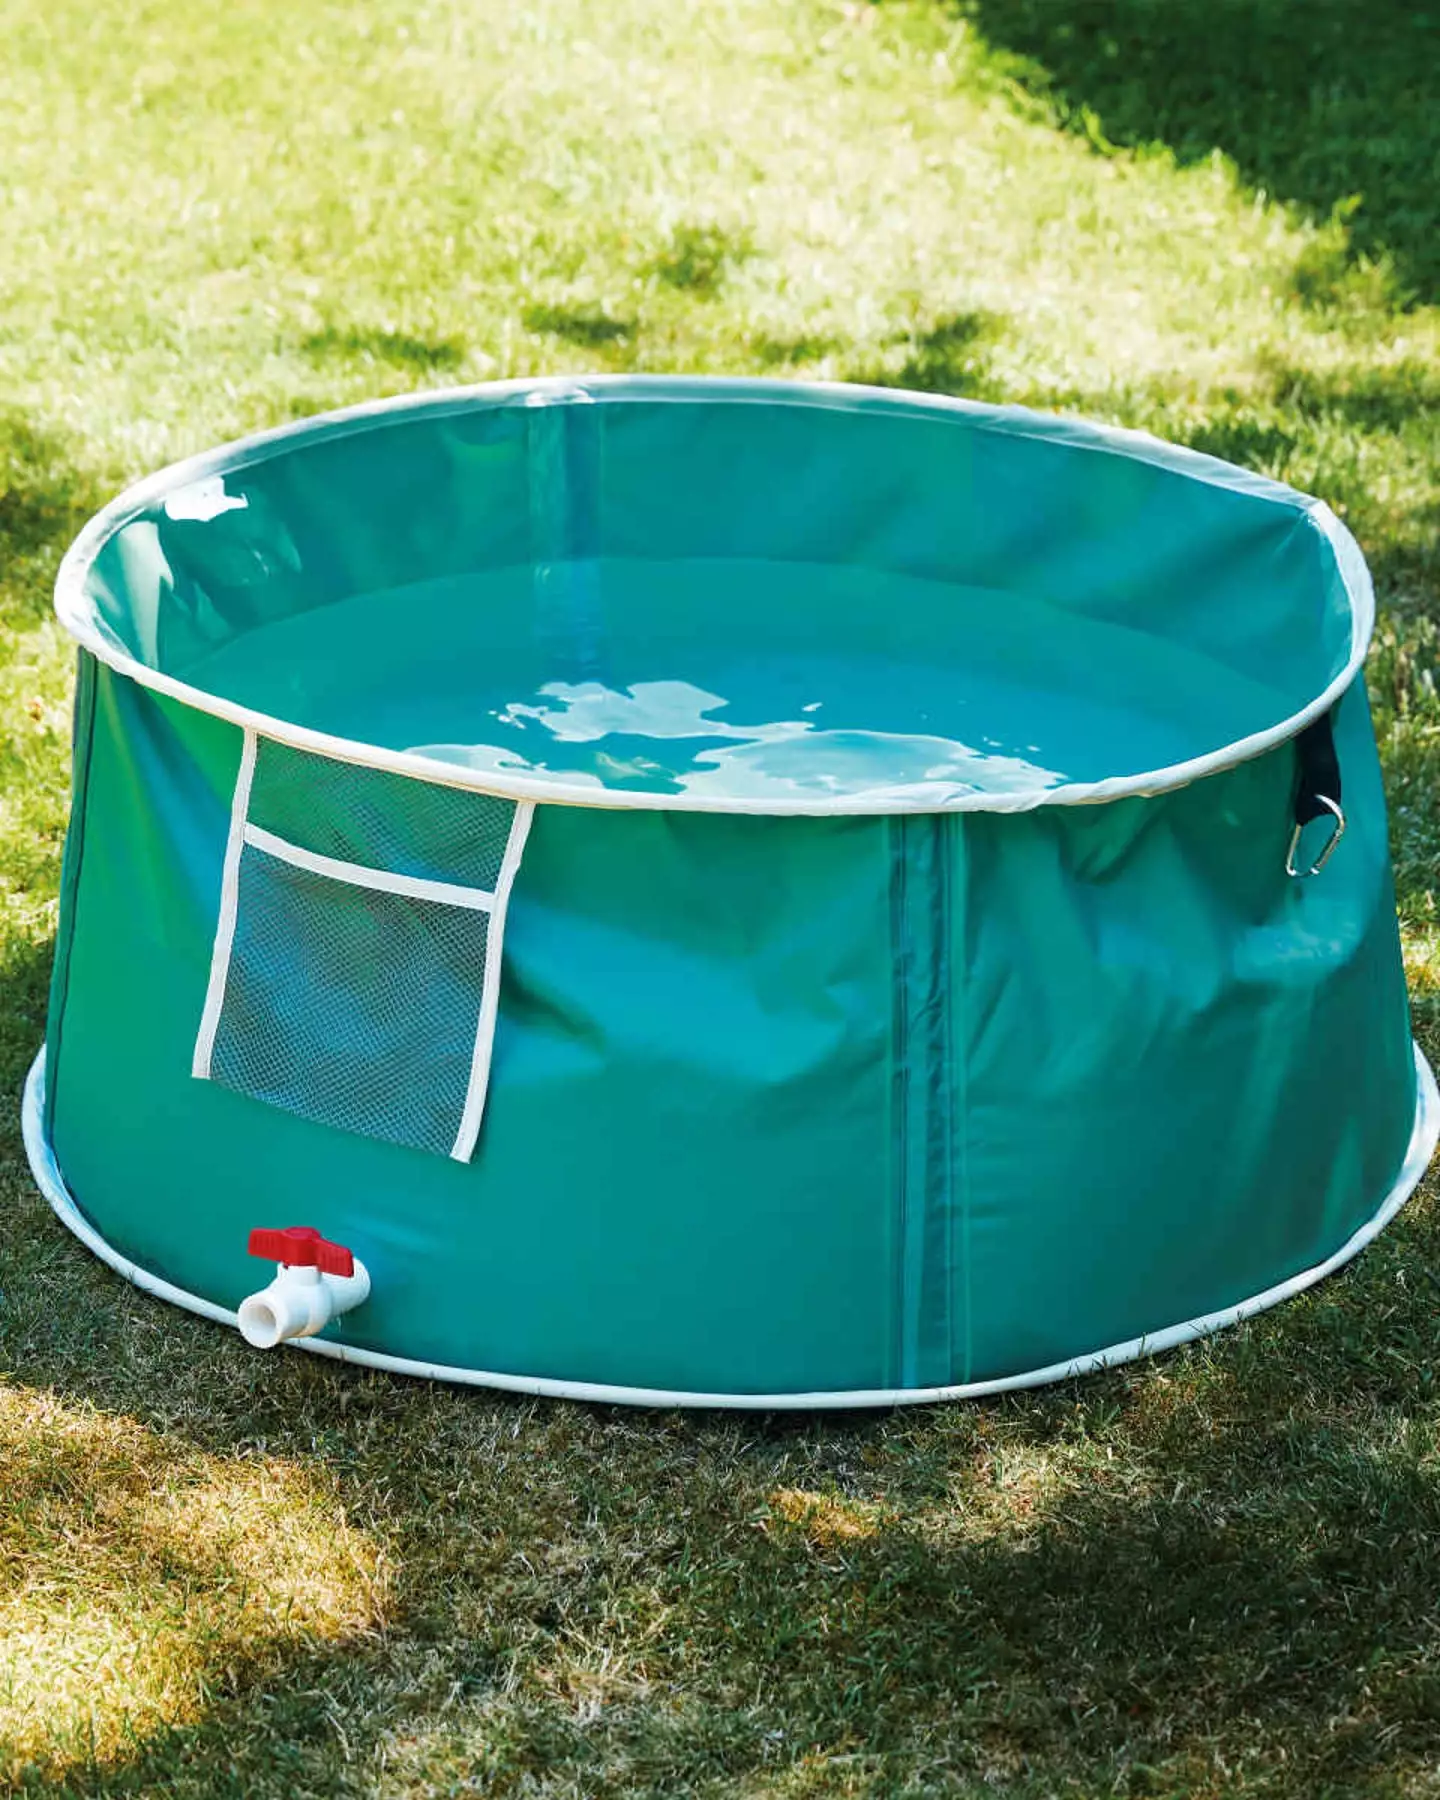 This pool promises to pop up and fold down in ten seconds (